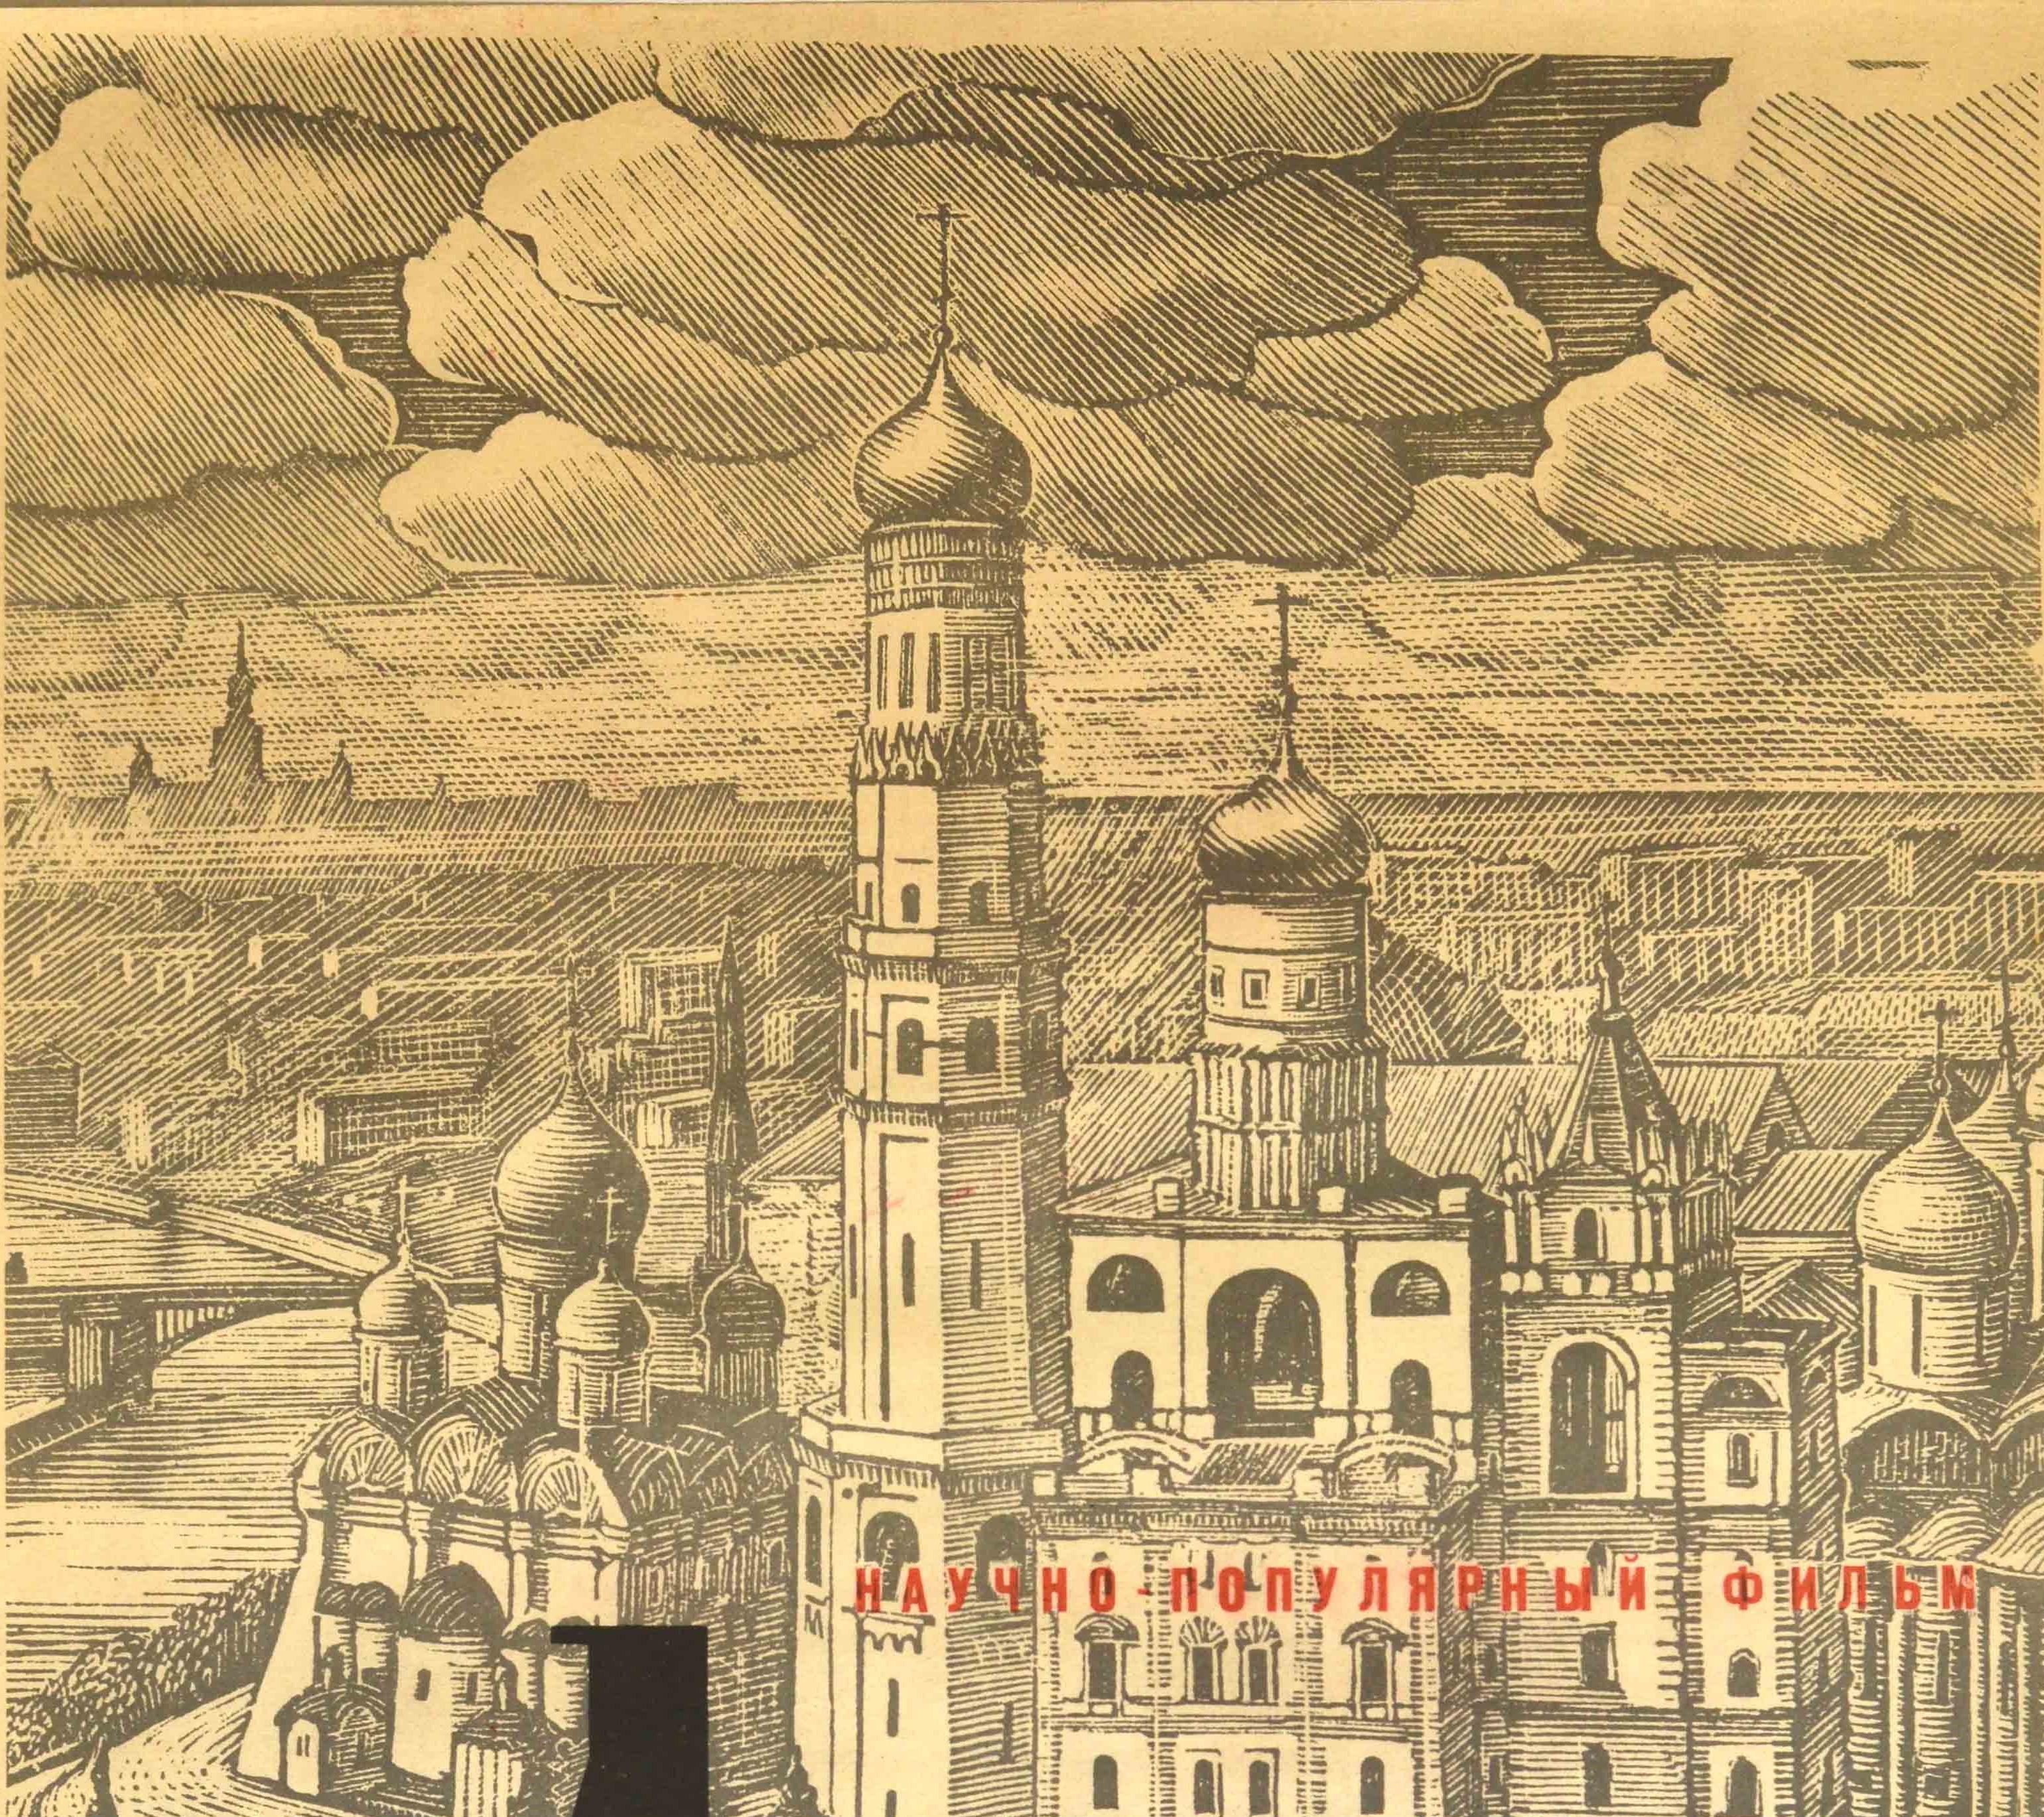 Original vintage Soviet documentary film poster for Ancient Cathedrals of the Moscow Kremlin / ??????? ?????? ?????? featuring a great design of the historic Moscow Kremlin with crosses on the domes behind the old city fortress wall with the river